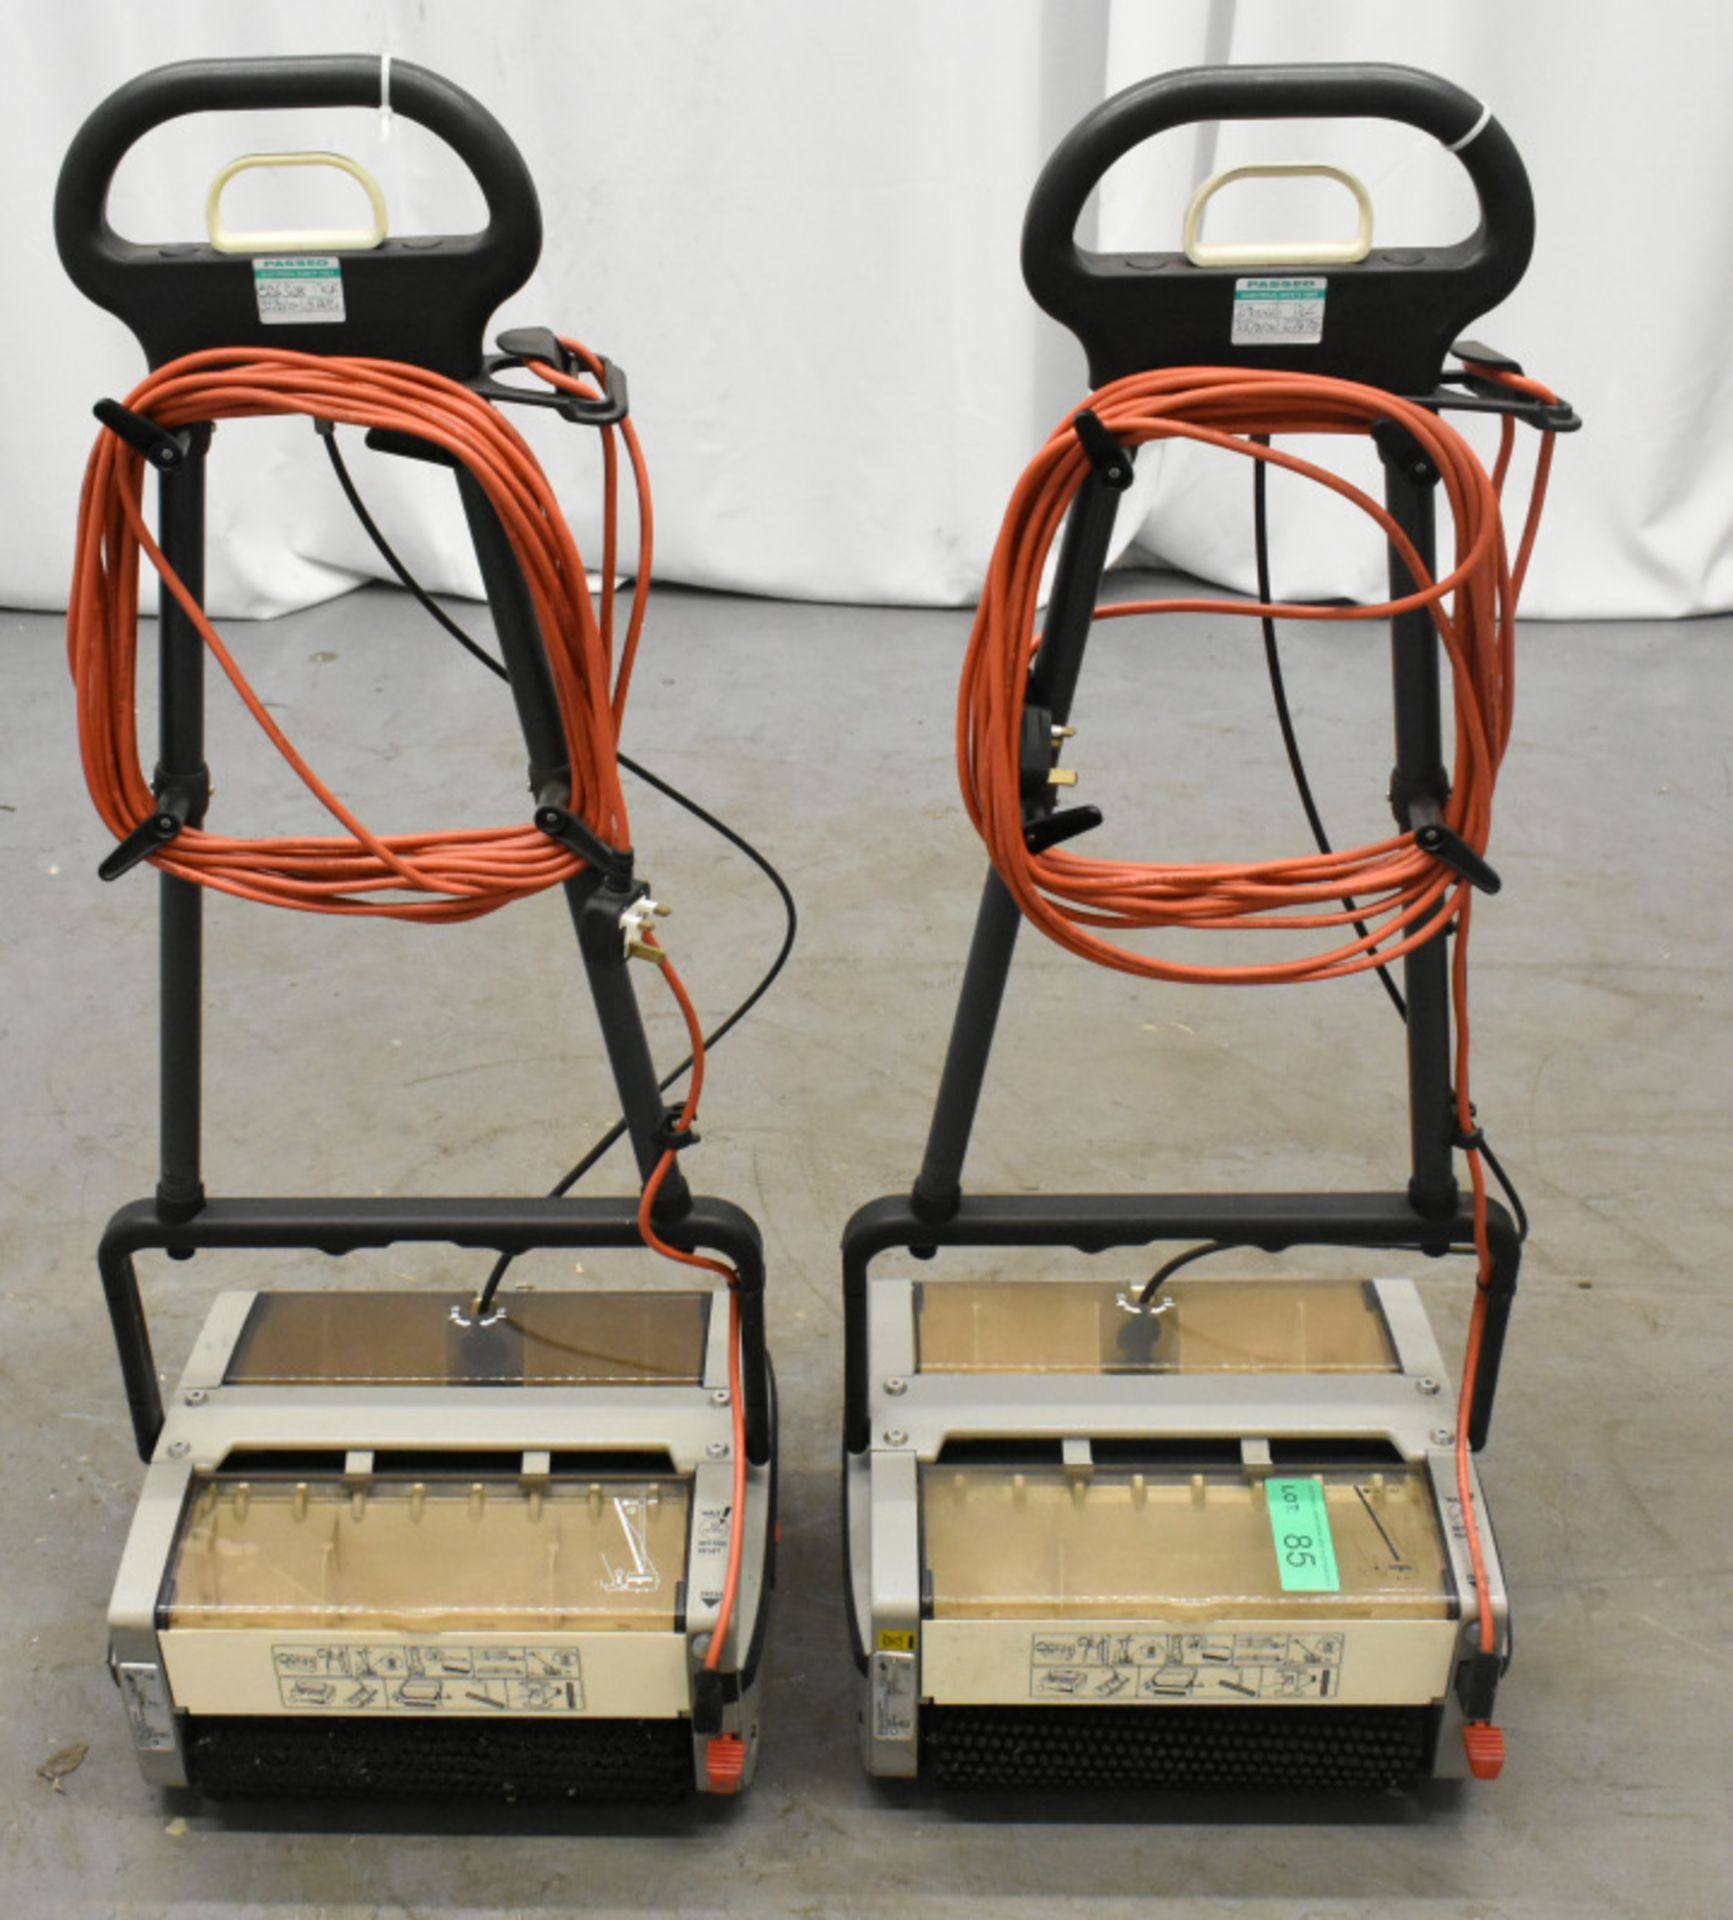 2 x Truvox Multiwash Floor and Carpet Scrubber Dryers, types- MW340/ICE, spares and repair - Image 2 of 3